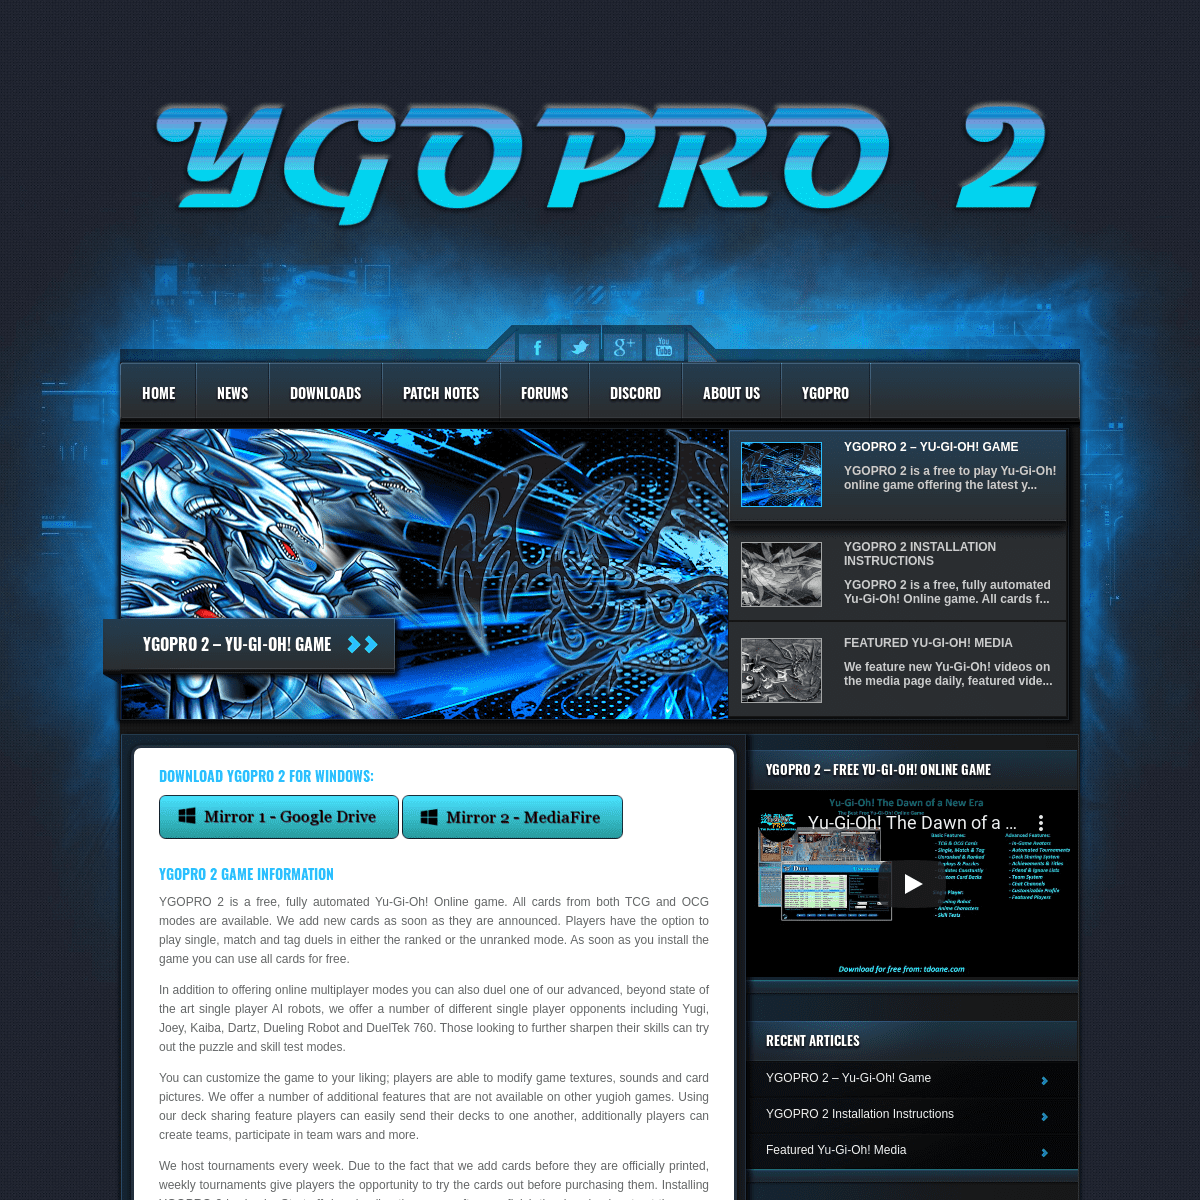 A complete backup of ygopro2.org